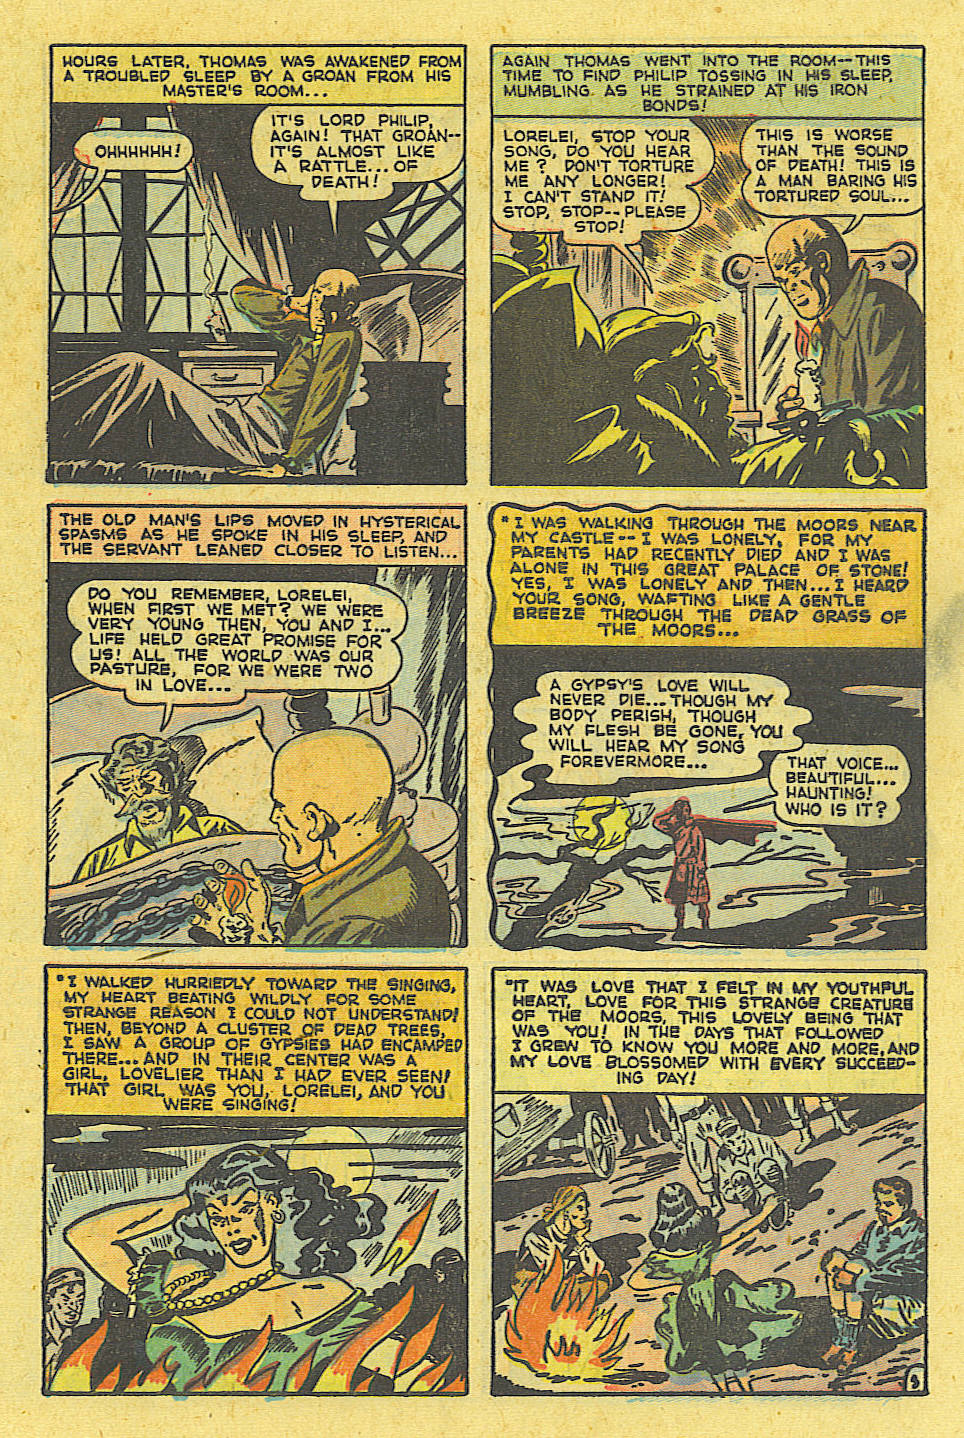 Marvel Tales (1949) 95 Page 12